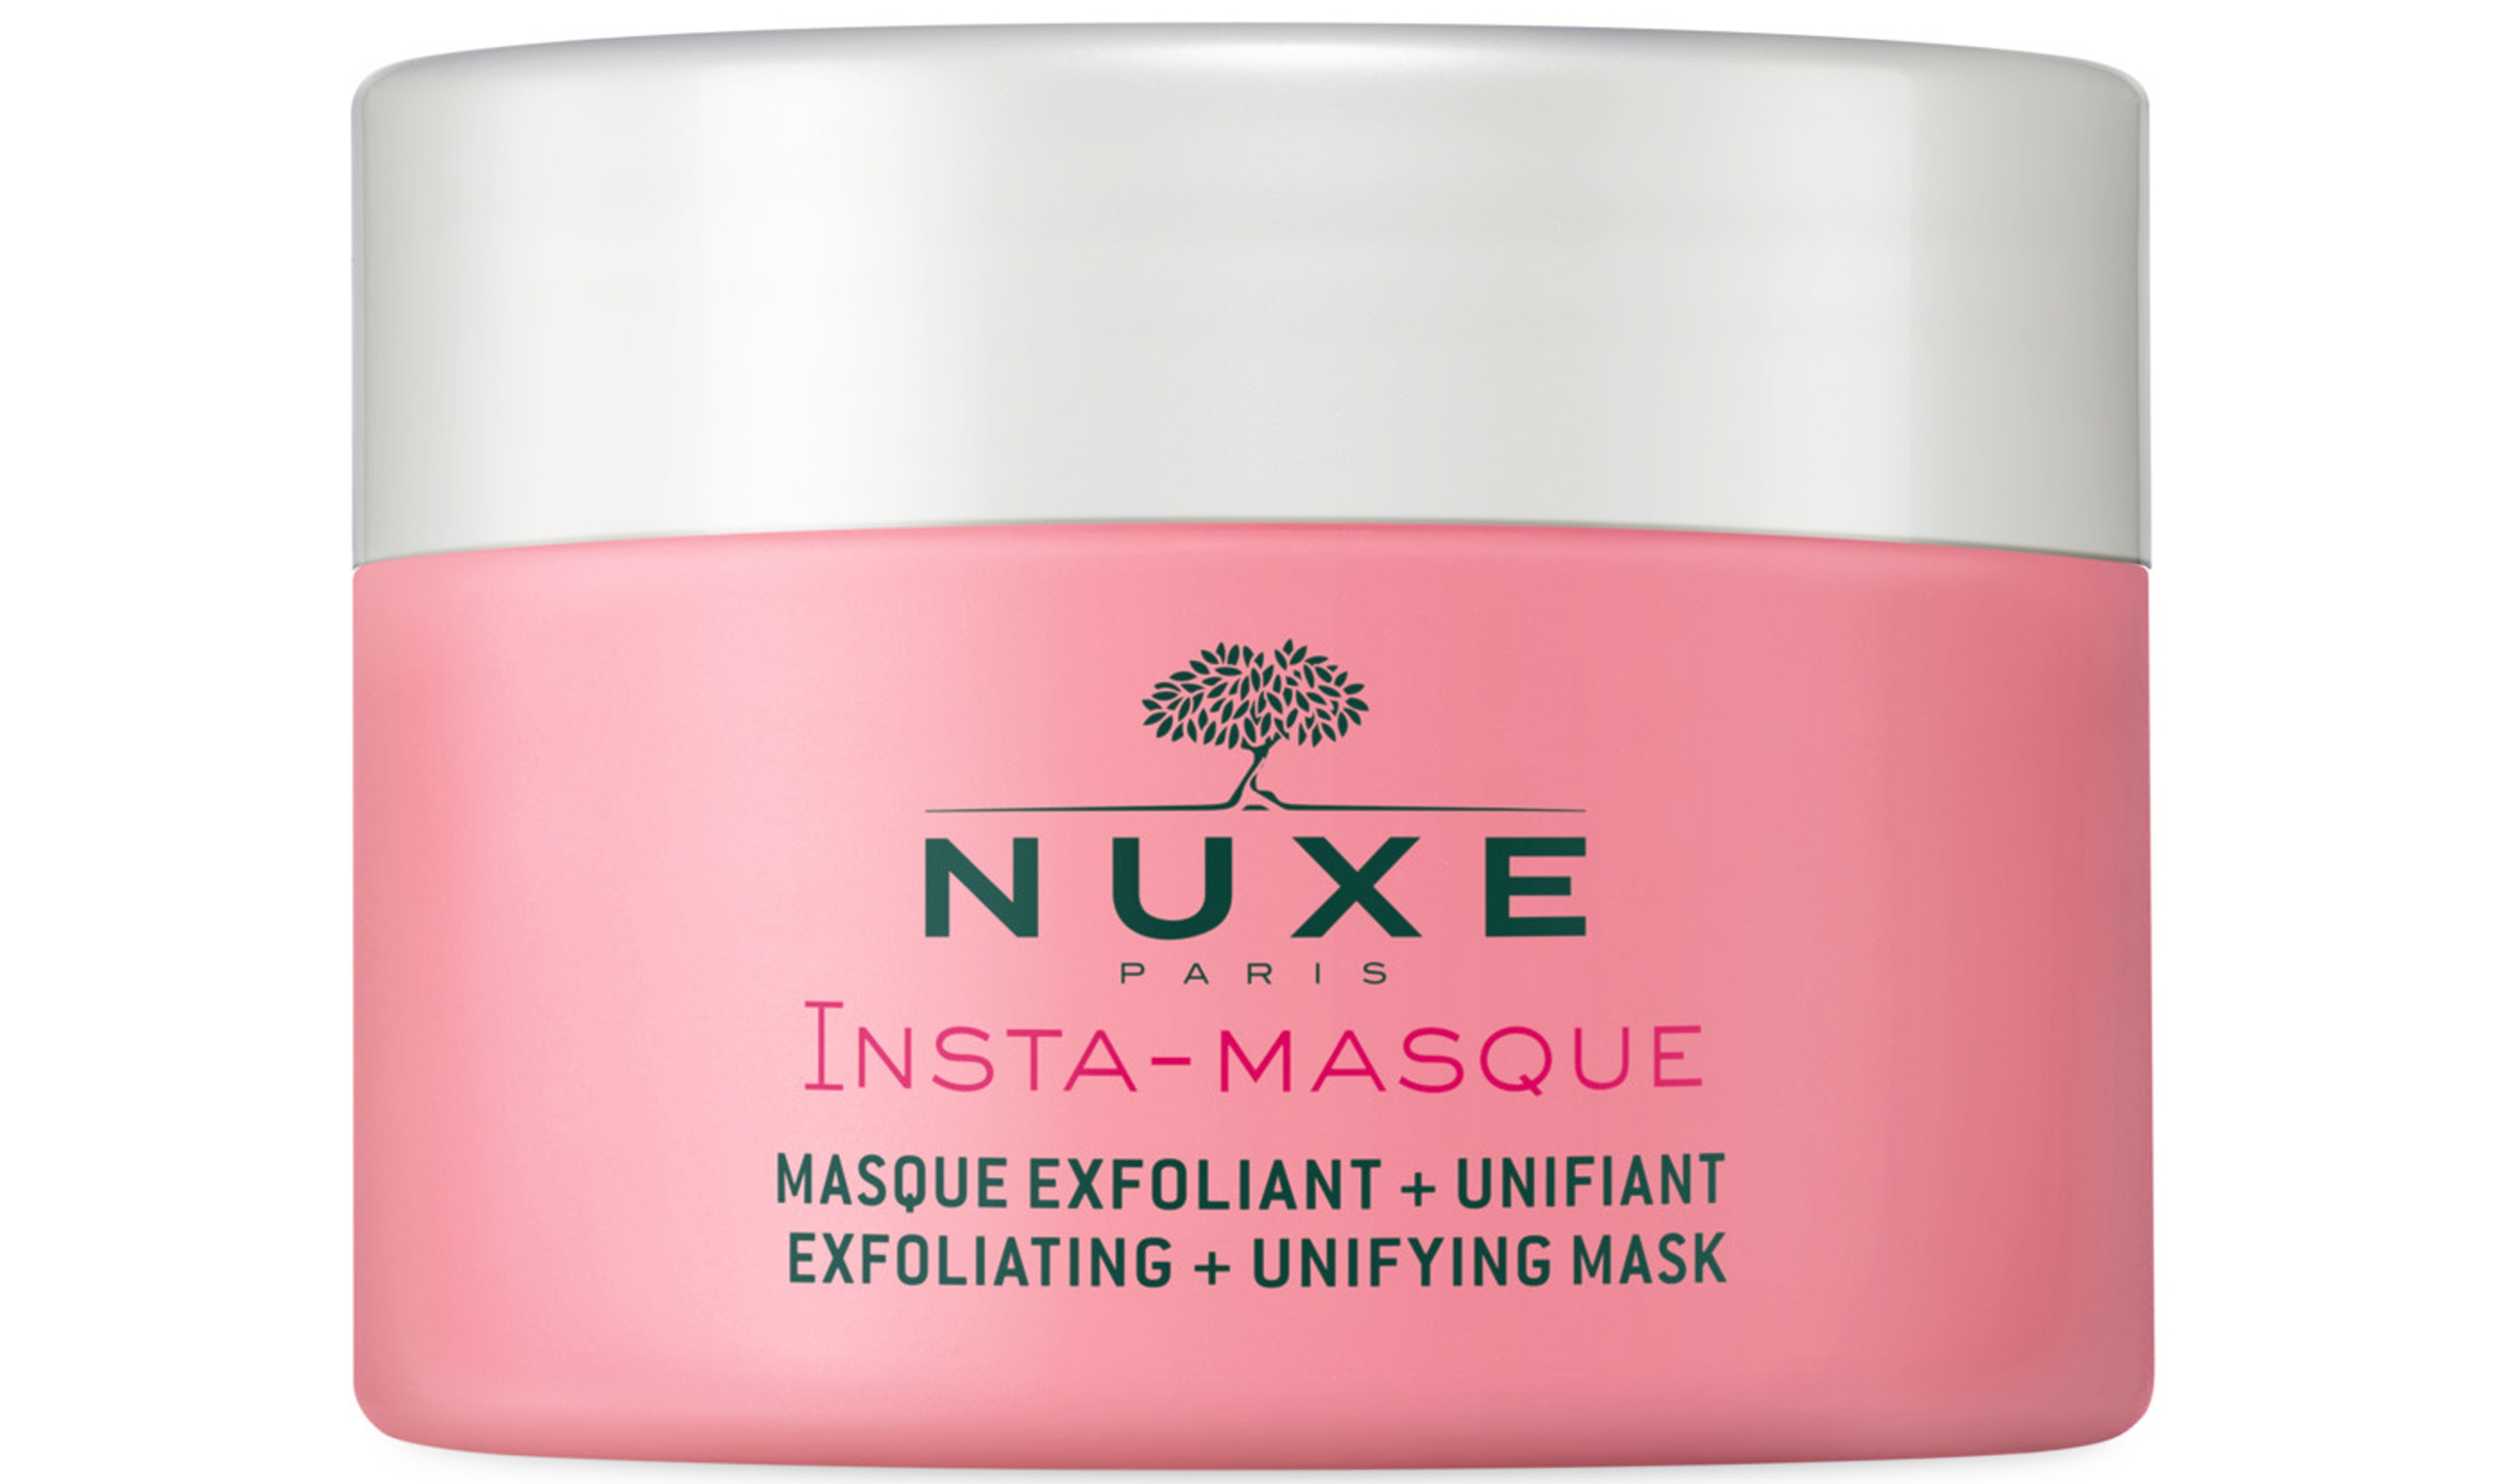 Nuxe Insta-Masque Exfoliating and Unifying Mask